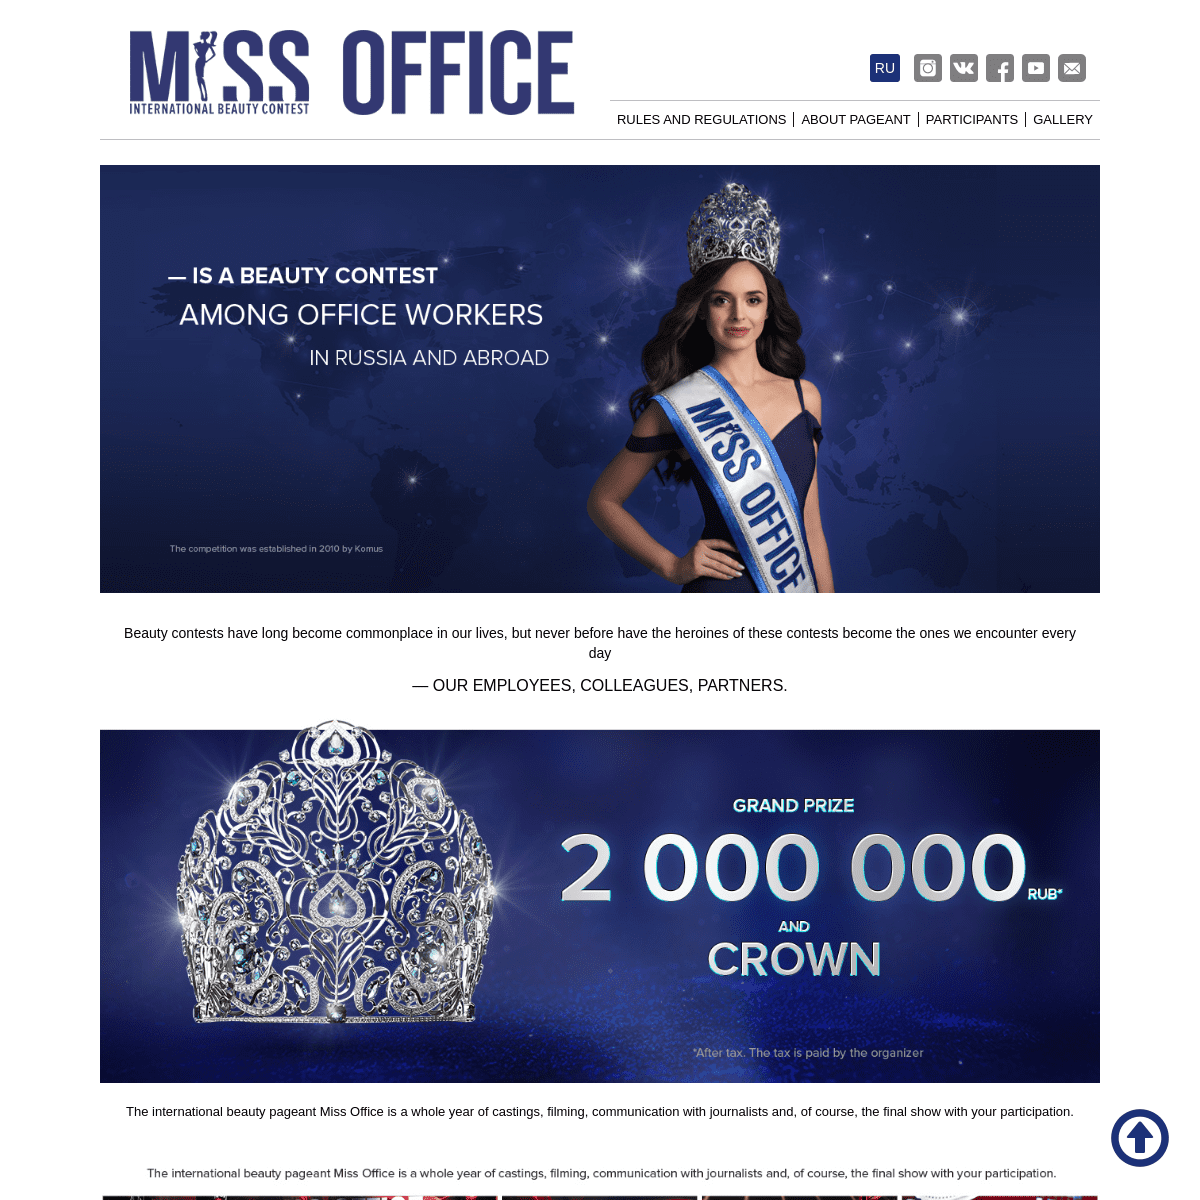 A complete backup of https://missoffice.org